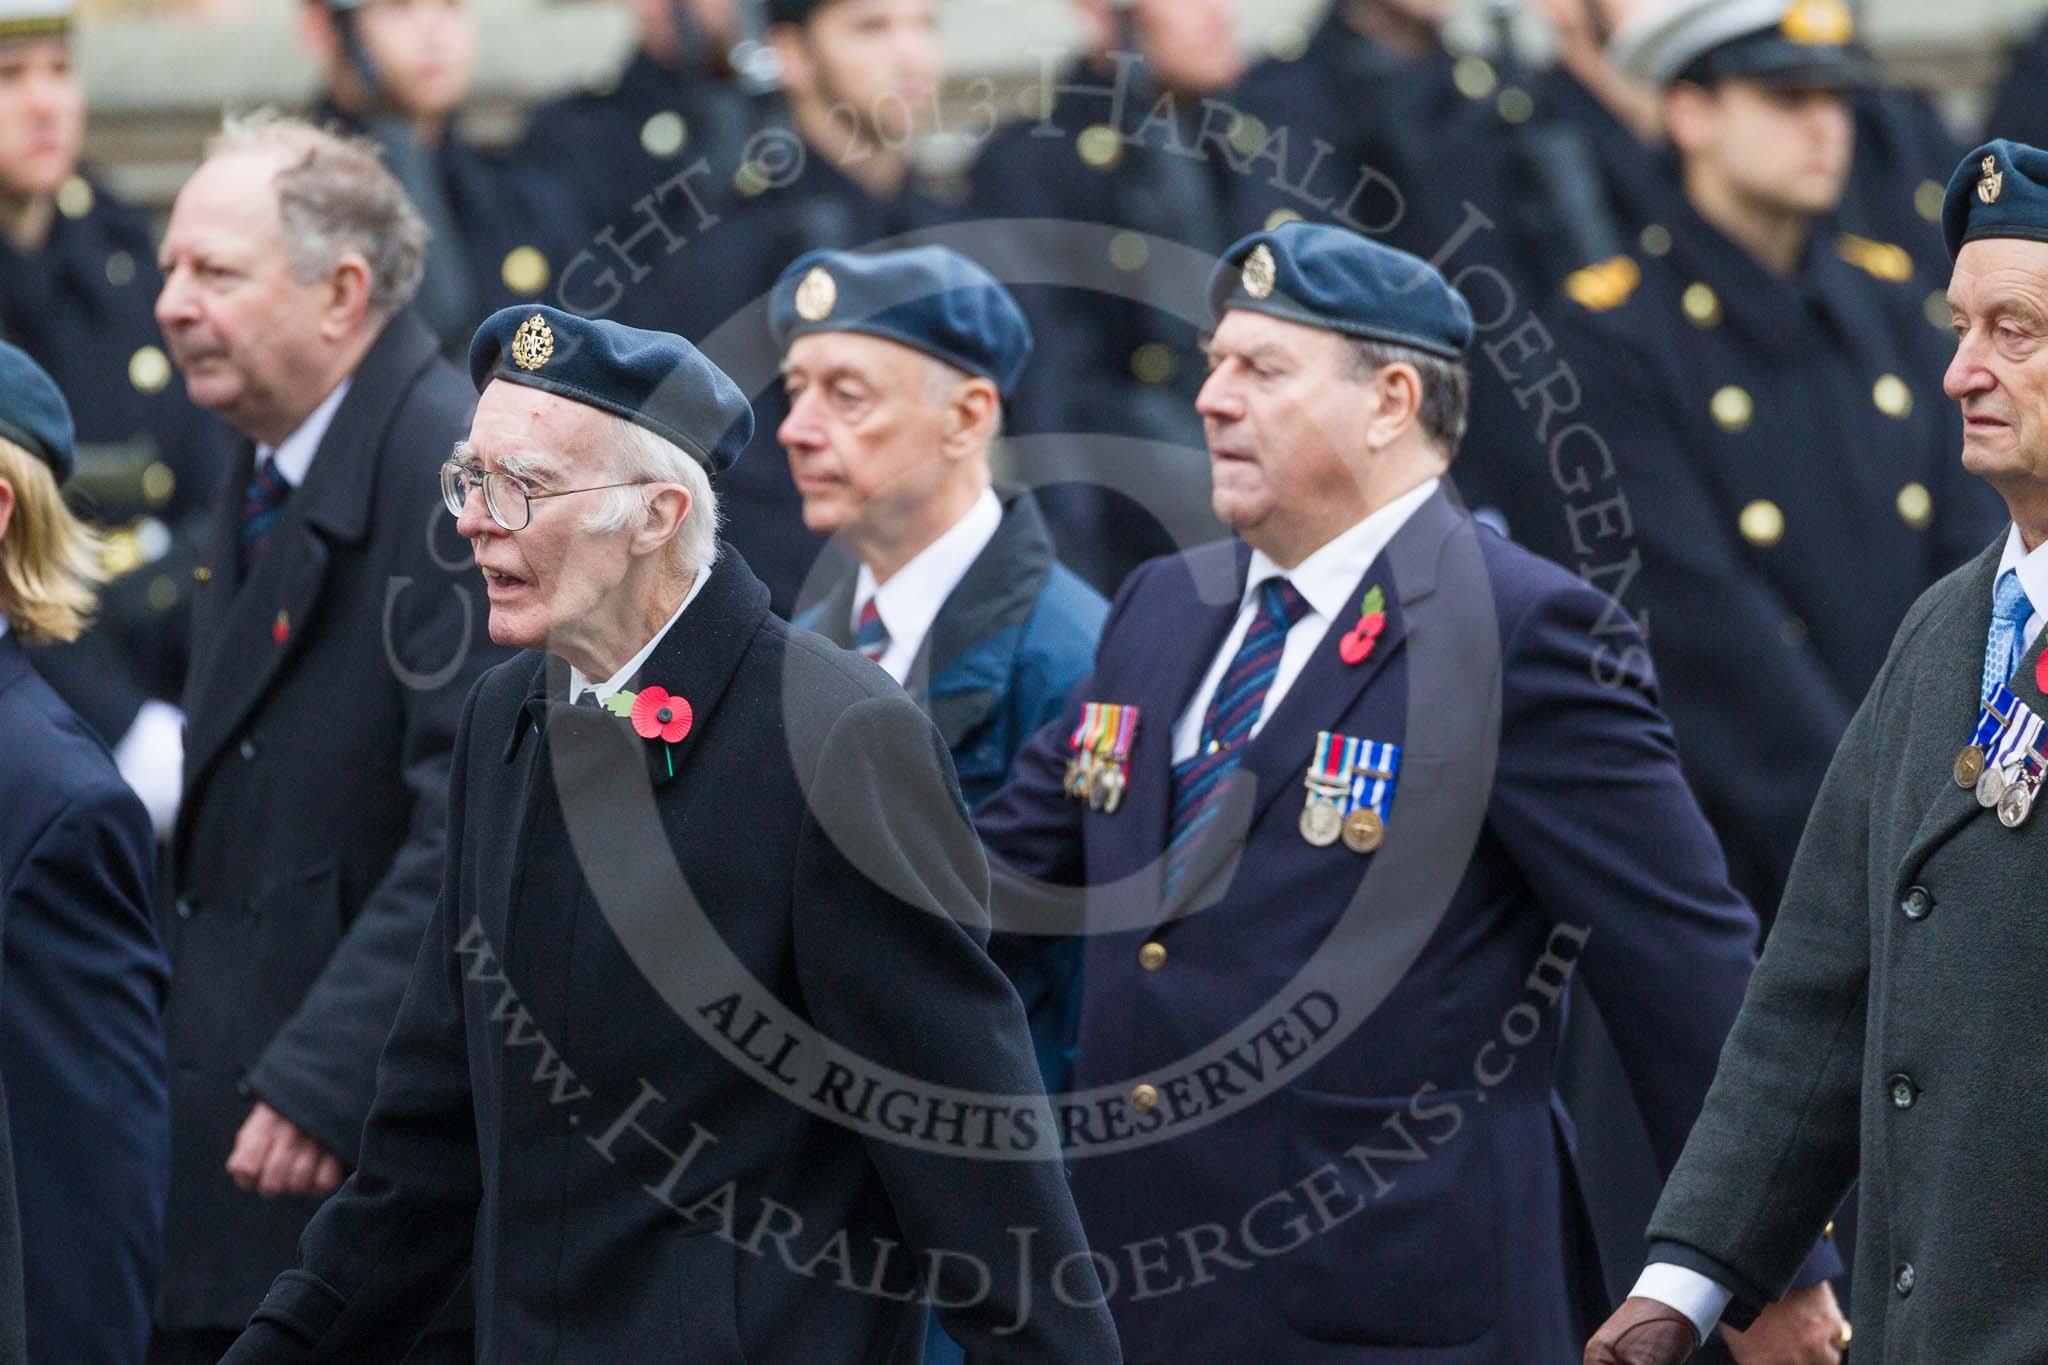 Remembrance Sunday at the Cenotaph 2015: Group C6, RAFLING Association.
Cenotaph, Whitehall, London SW1,
London,
Greater London,
United Kingdom,
on 08 November 2015 at 11:48, image #468